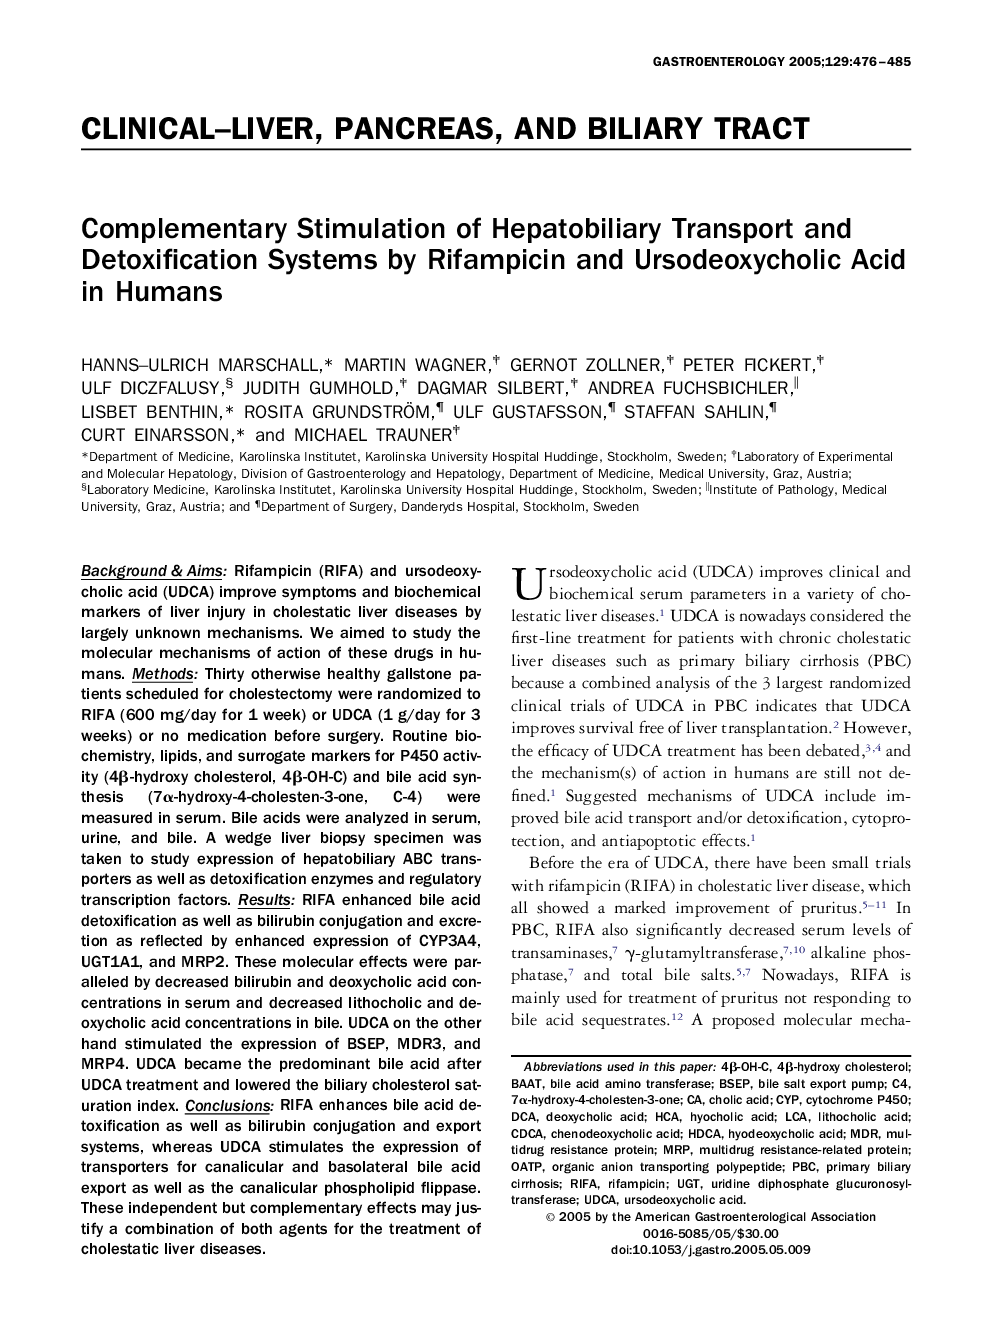 Complementary Stimulation of Hepatobiliary Transport and Detoxification Systems by Rifampicin and Ursodeoxycholic Acid in Humans